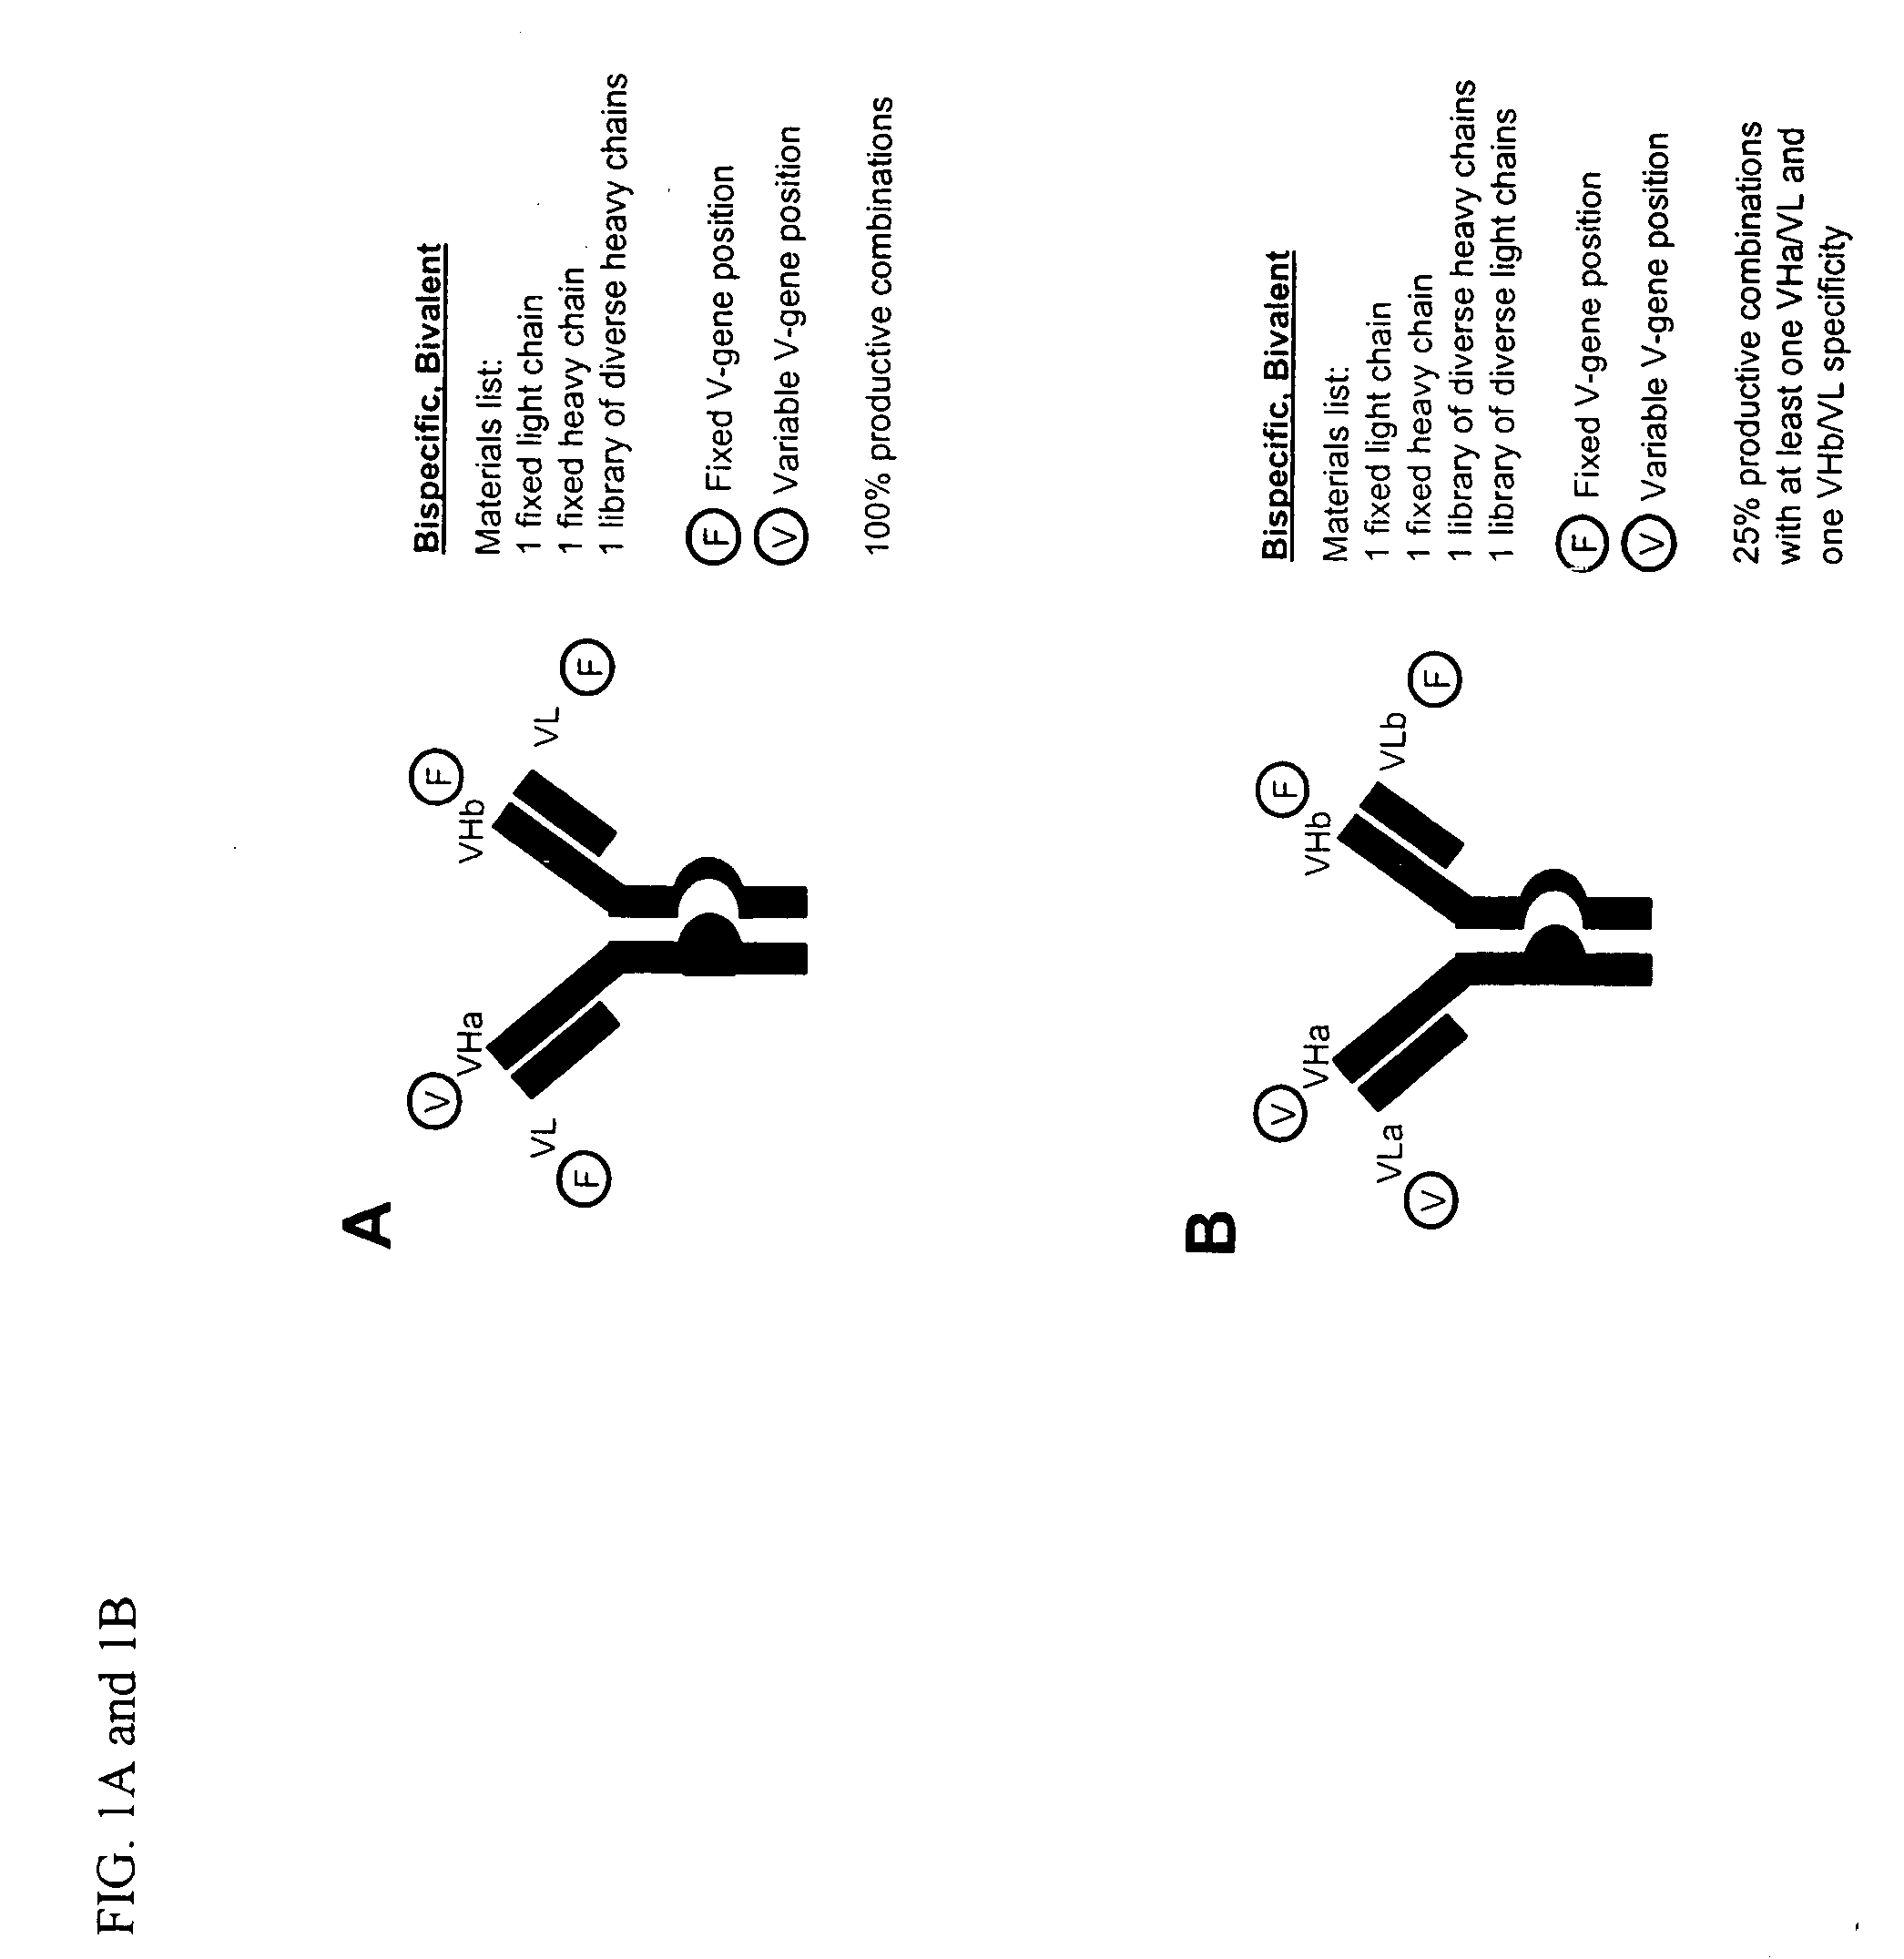 Methods for producing and identifying multispecific antibodies